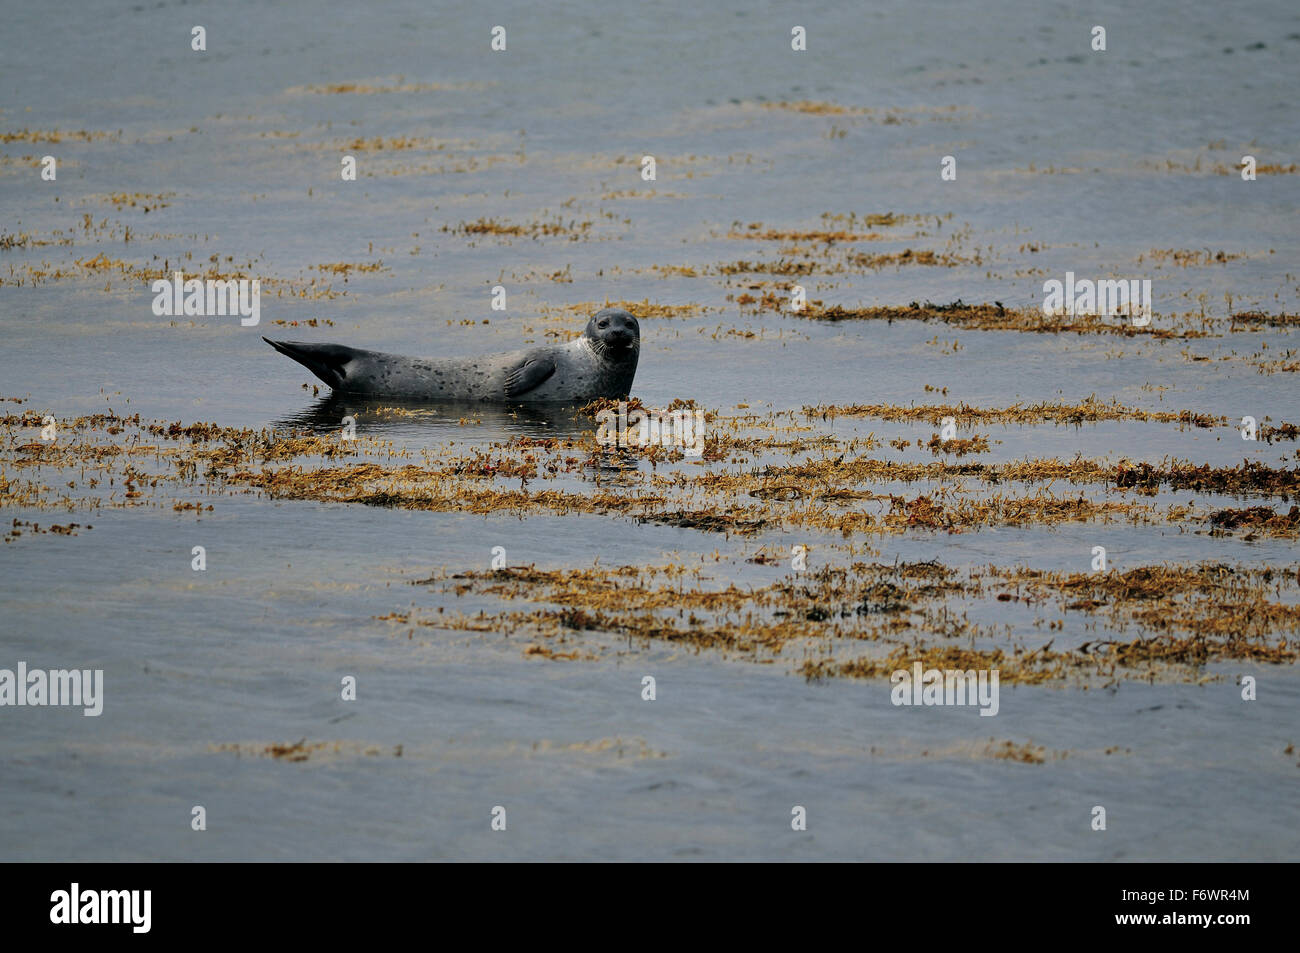 Grey seal at beach, Orkney Islands, Scotland, Great Britain Stock Photo